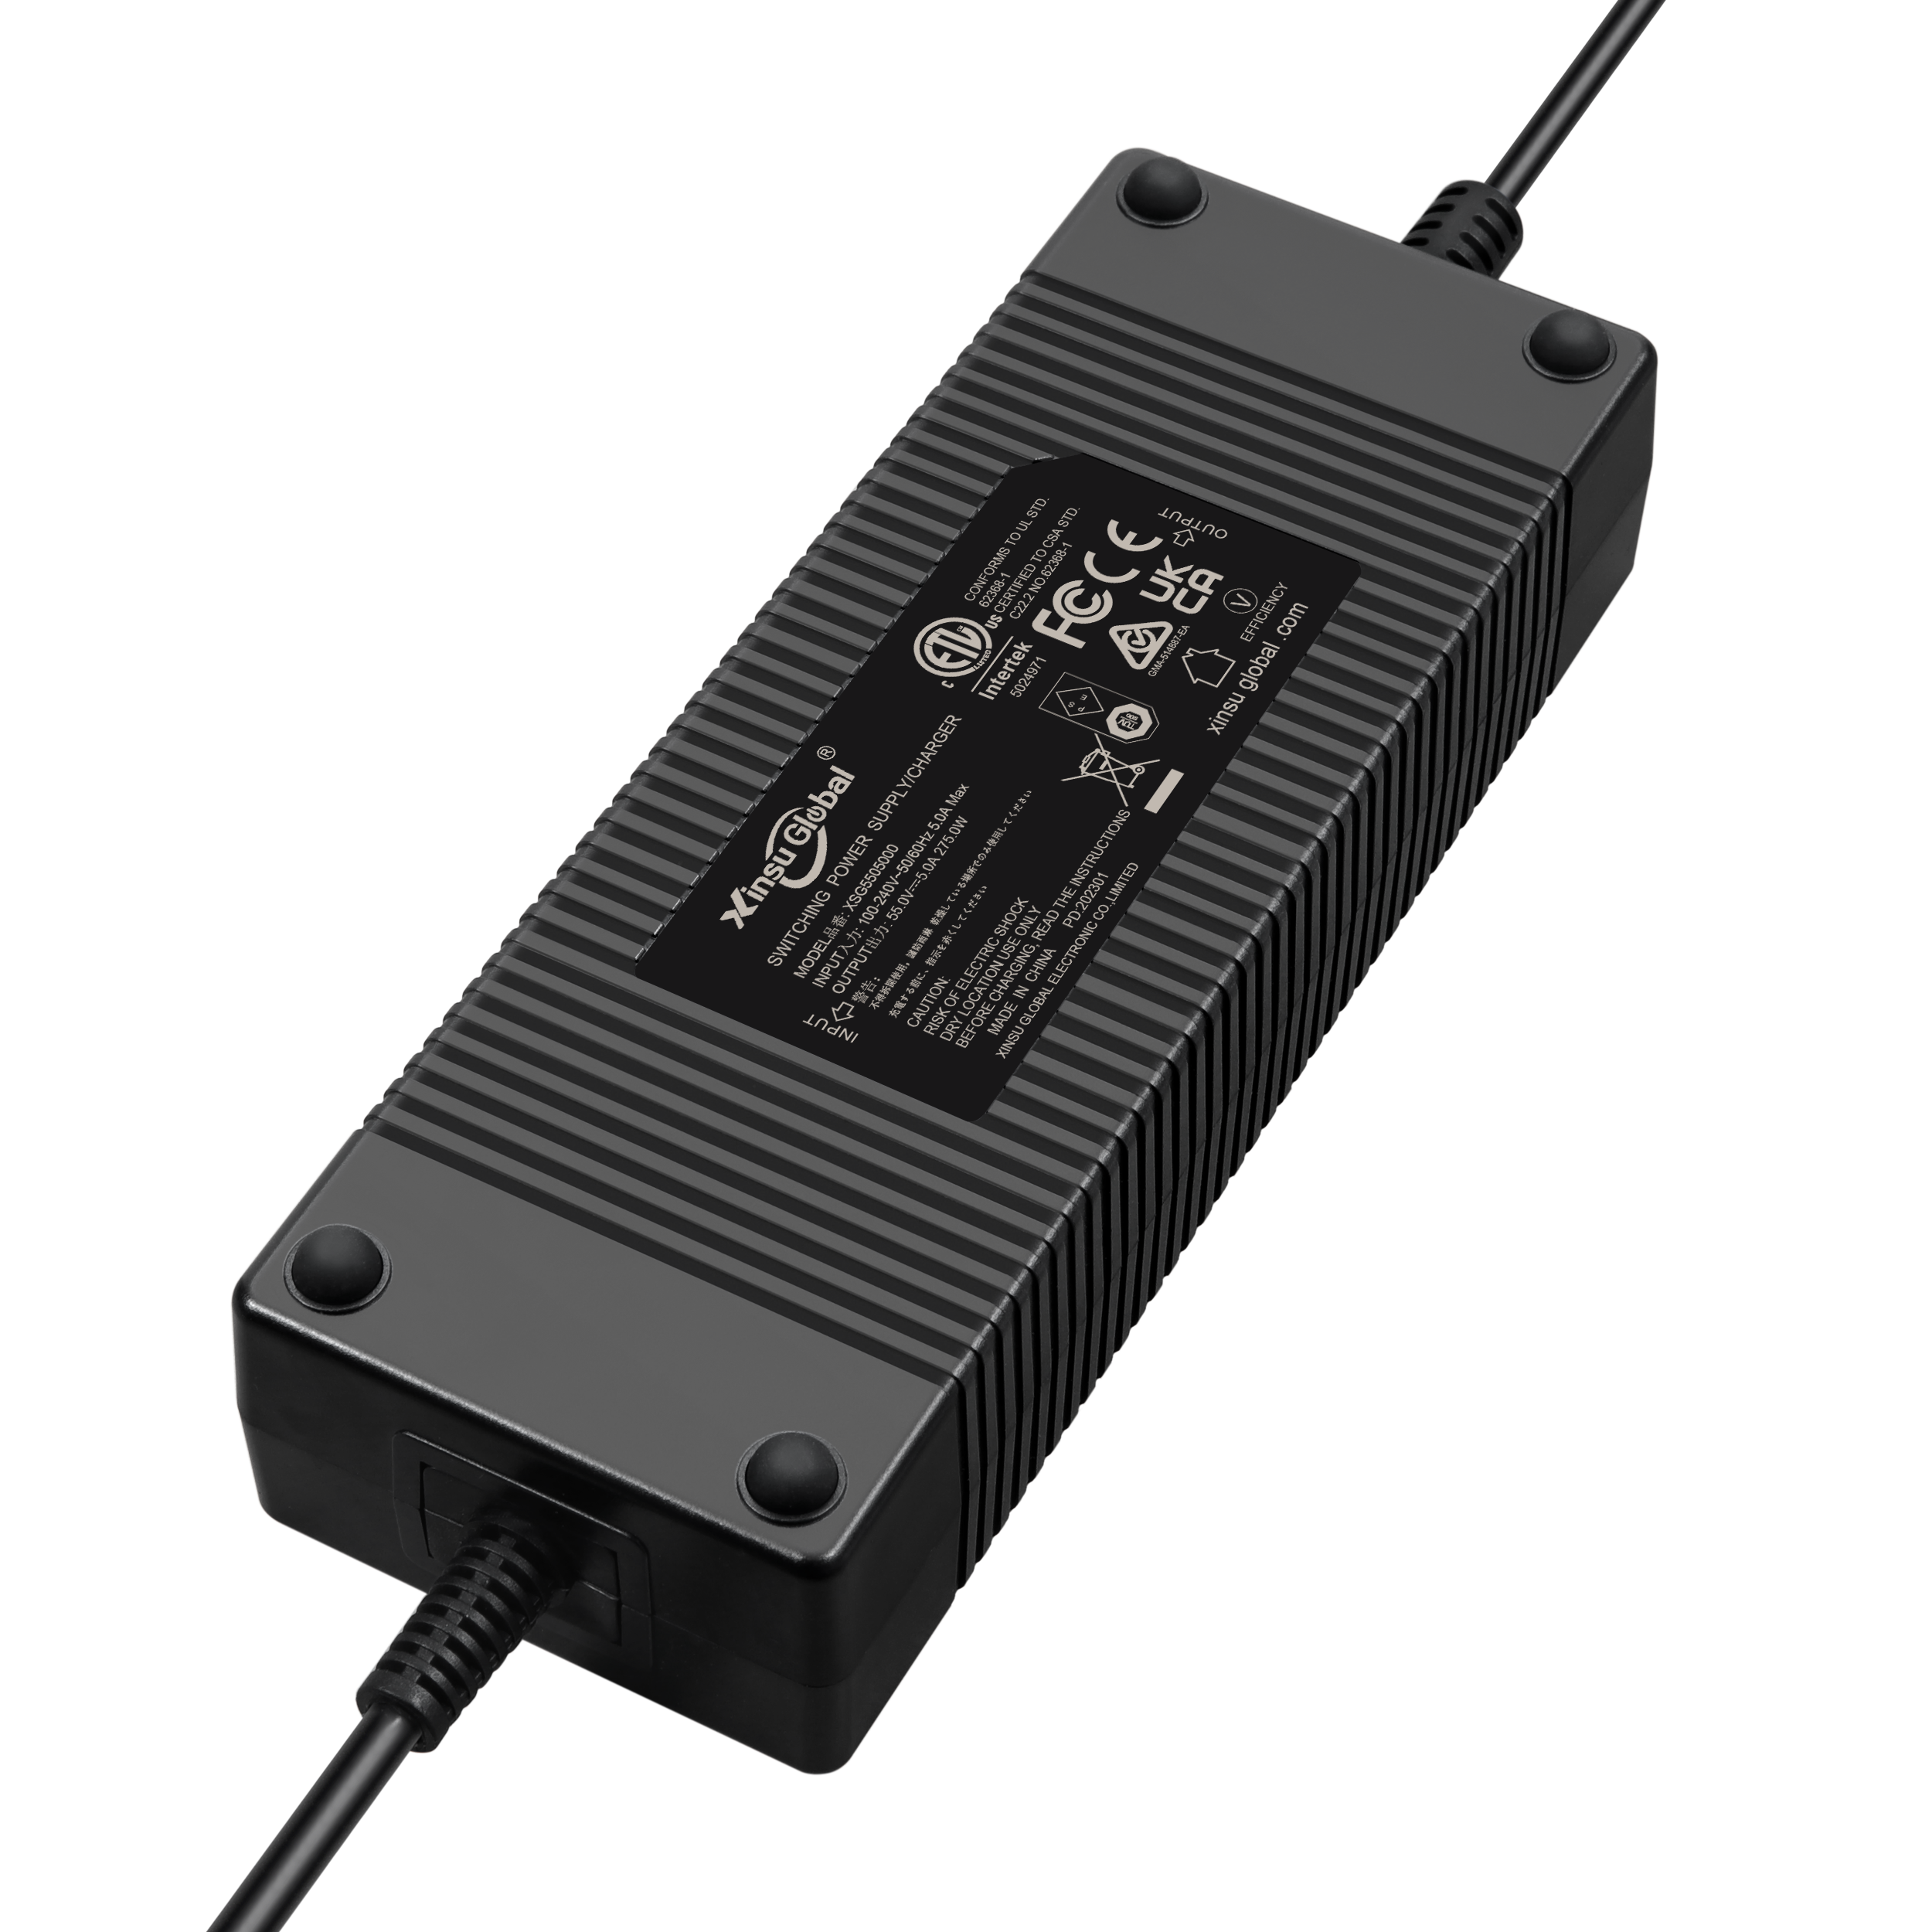 55v-5a-power-adapter.png